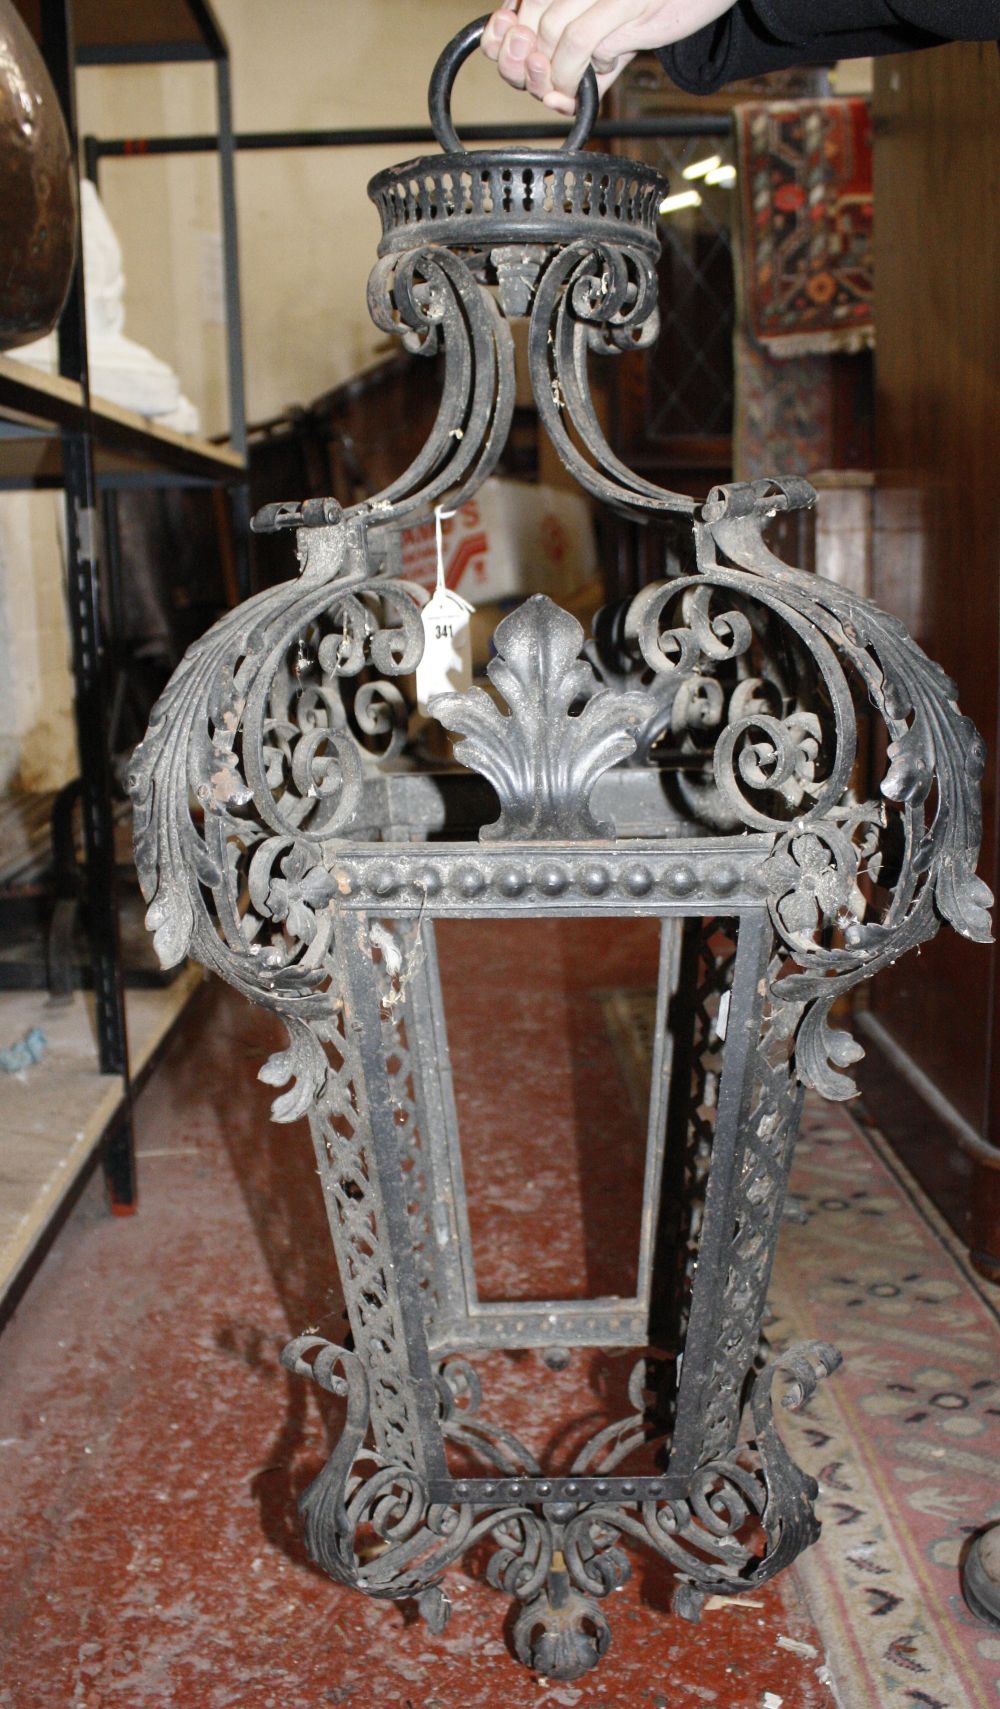 A black painted wrought-iron lantern in the Continental 18th century style